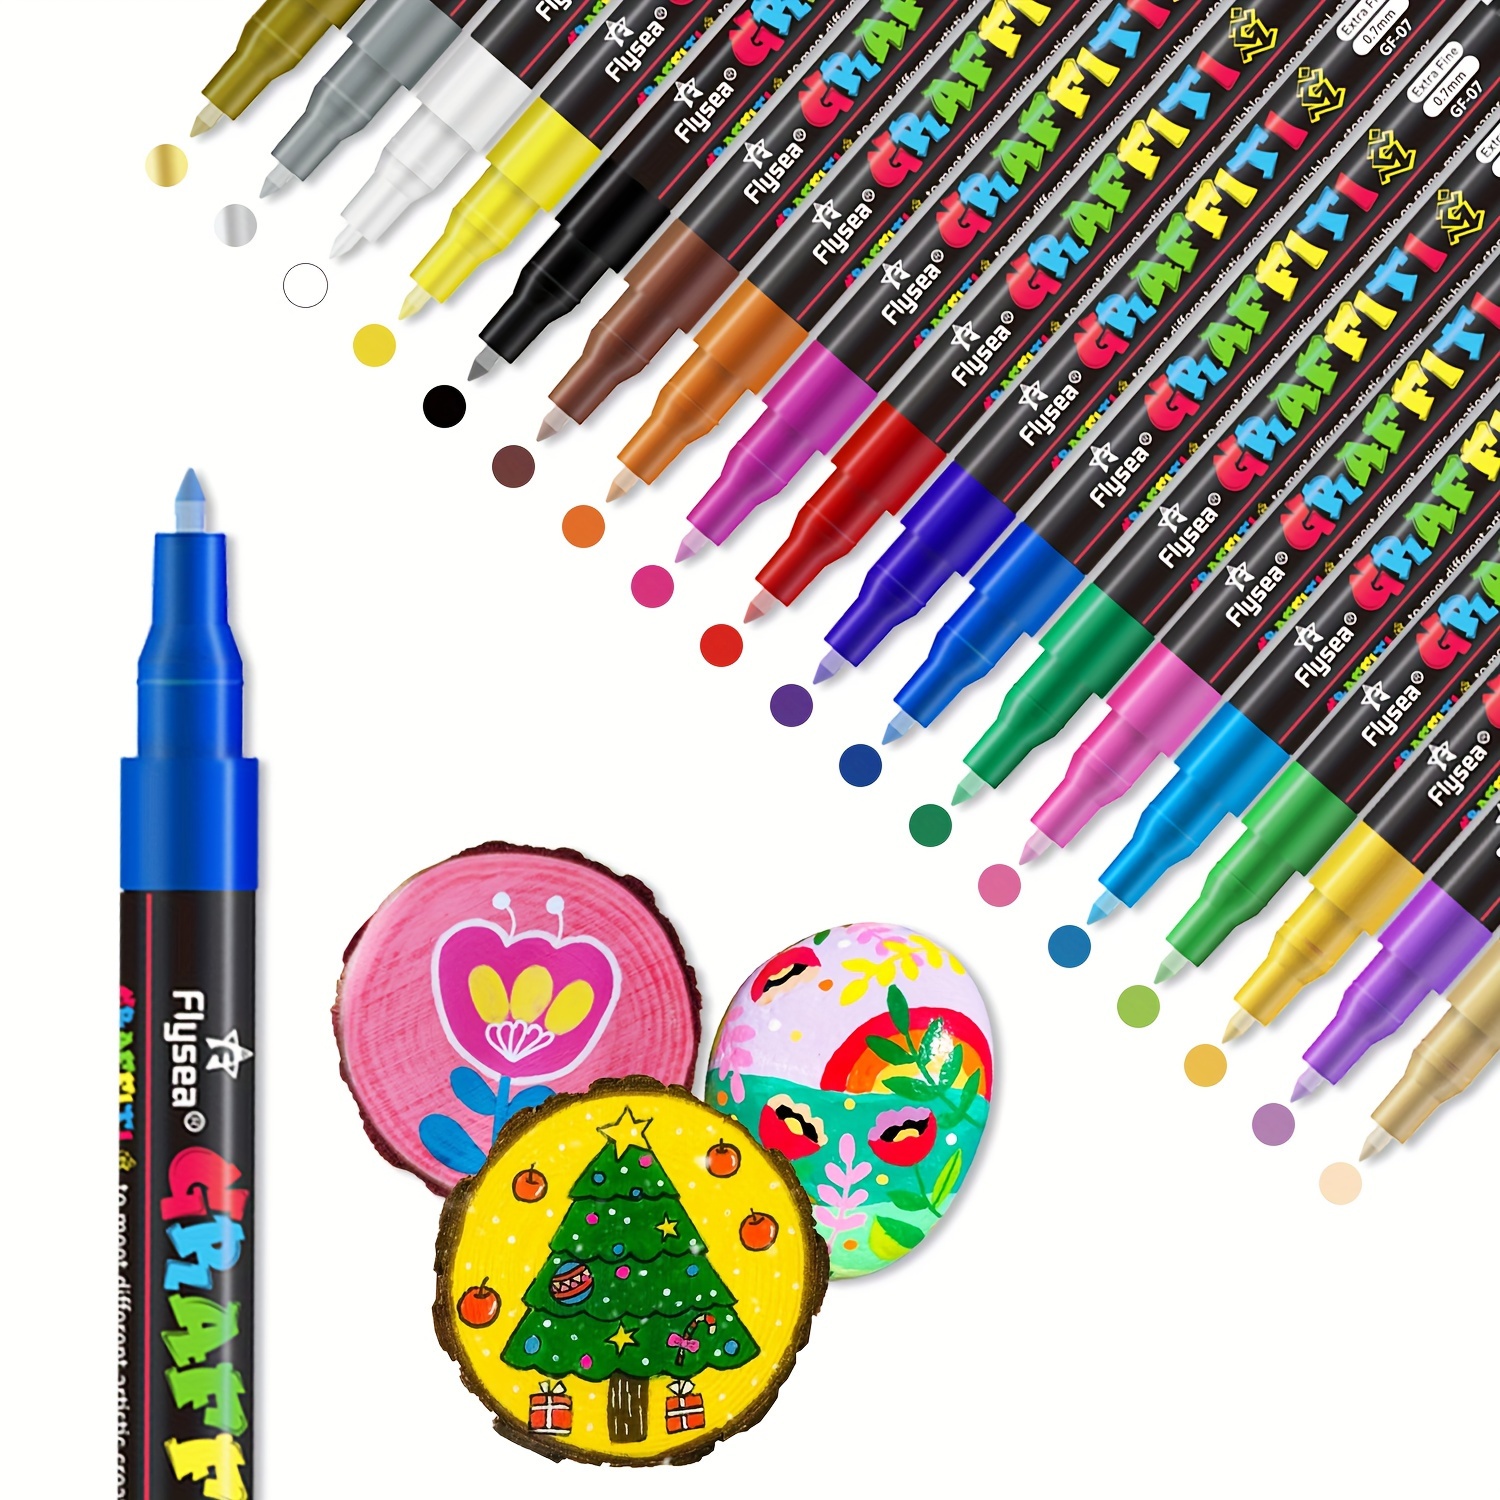 Acrylic Paint Pens Rock Painting Pens 18 Colors Paint Pens For Rock  Painting, Eggs, Glass, Wood, Stones, Glass Paint Pes, Acrylic Pens Paint  Markers Art Supplies, Egg Painting Kit For Easter 